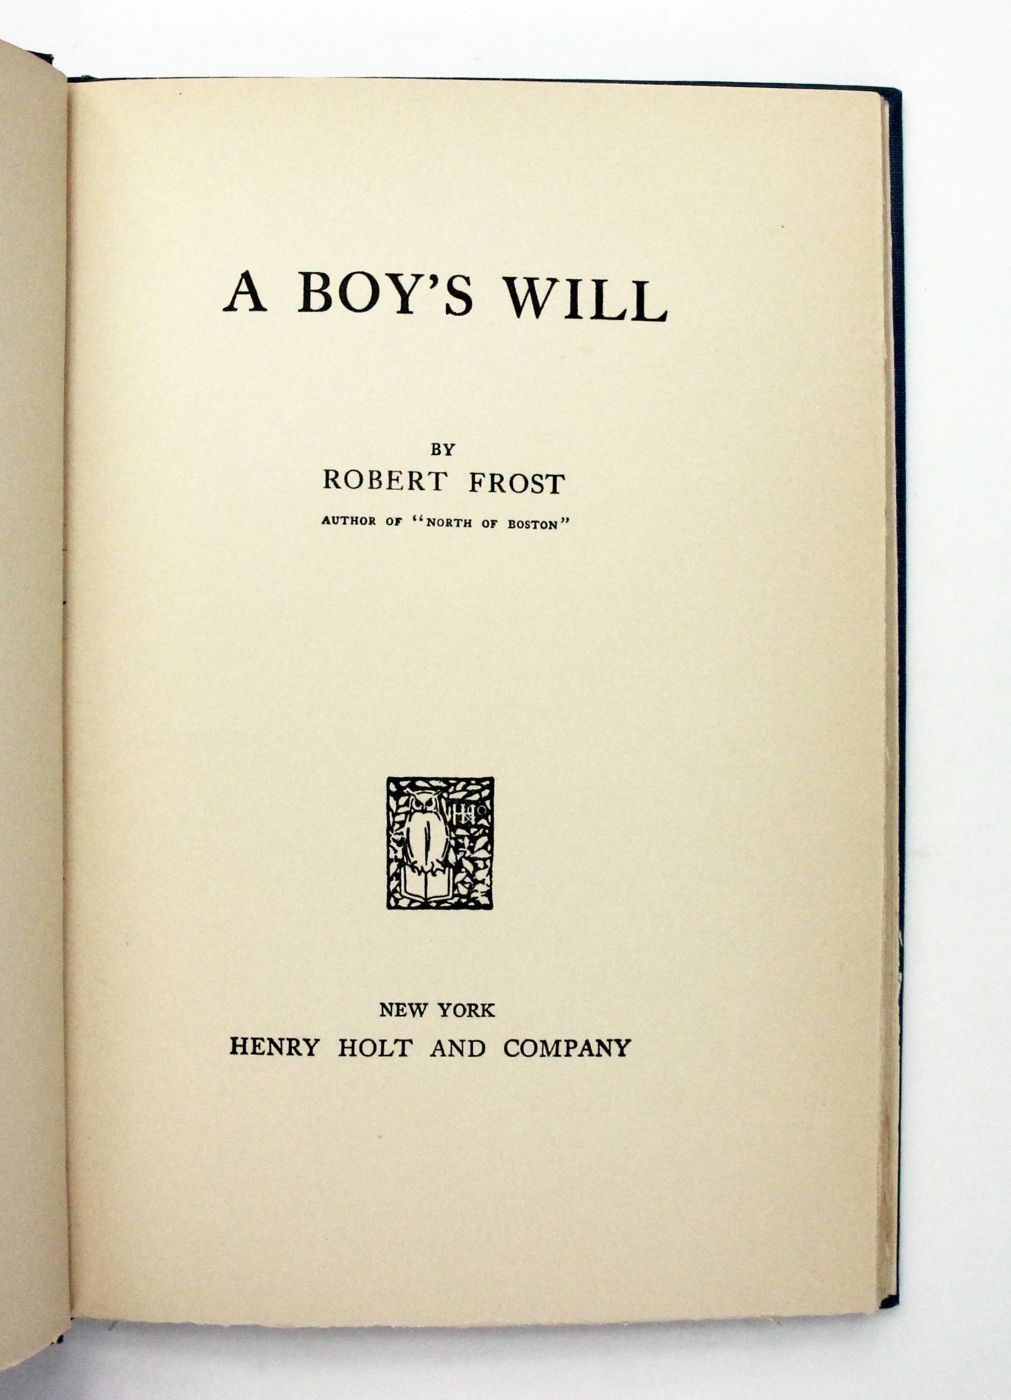 A BOY'S WILL -  image 4